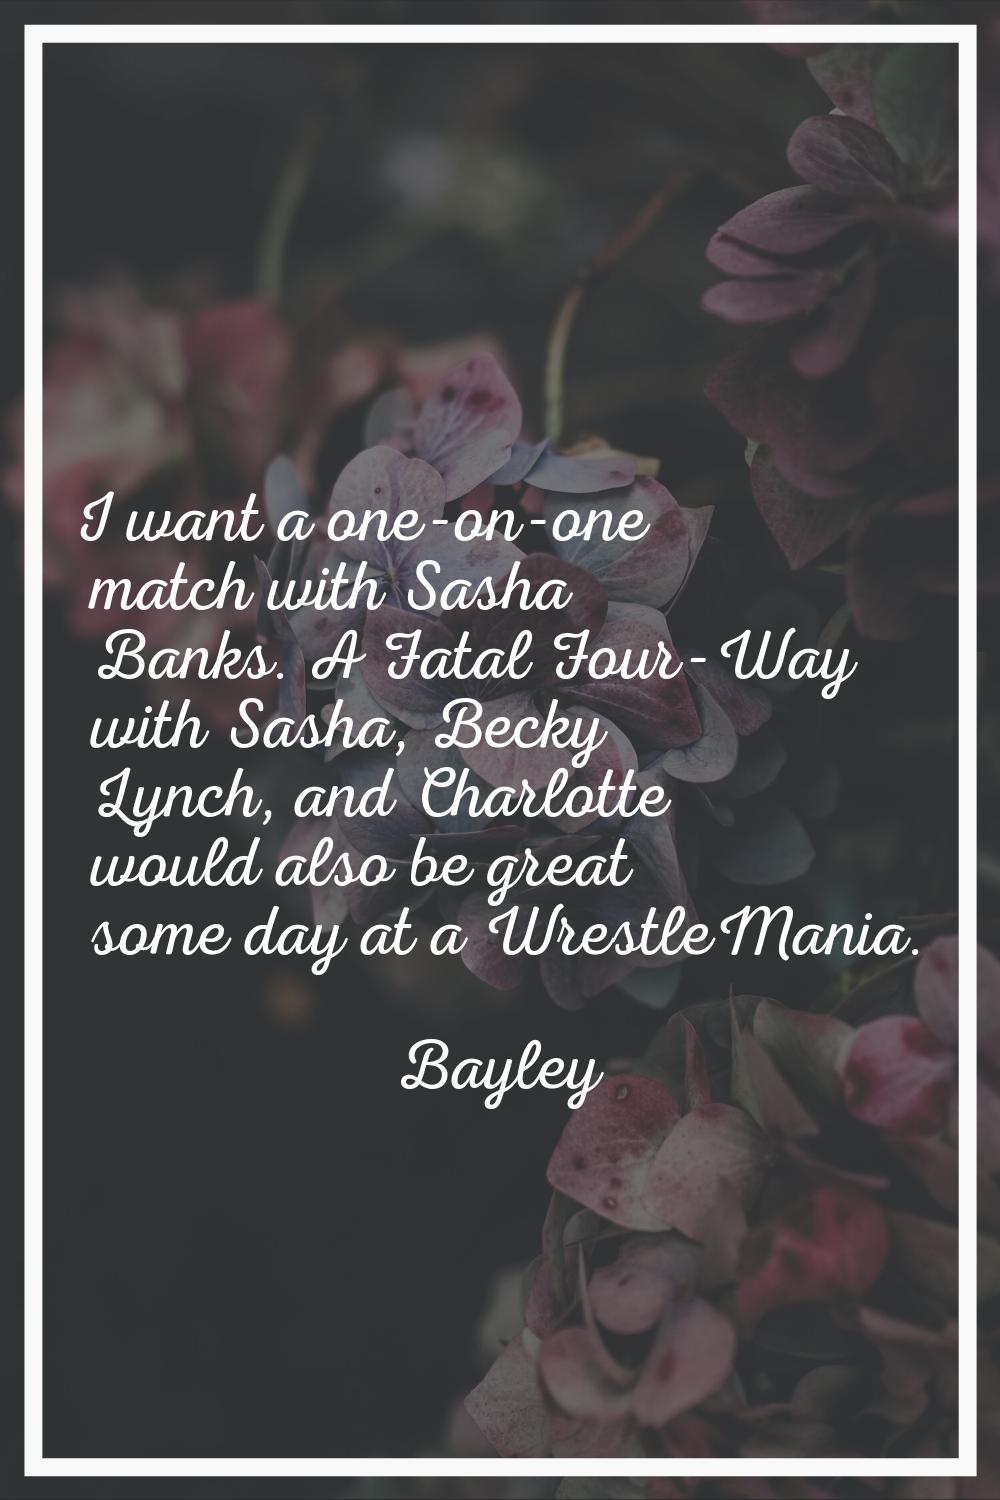 I want a one-on-one match with Sasha Banks. A Fatal Four-Way with Sasha, Becky Lynch, and Charlotte